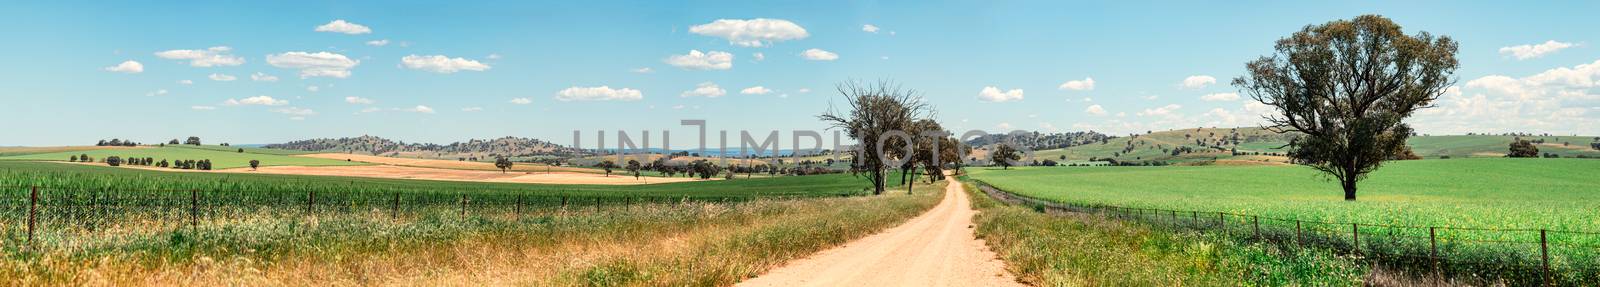 Dusty dirt road through rural countryside landscape panorama